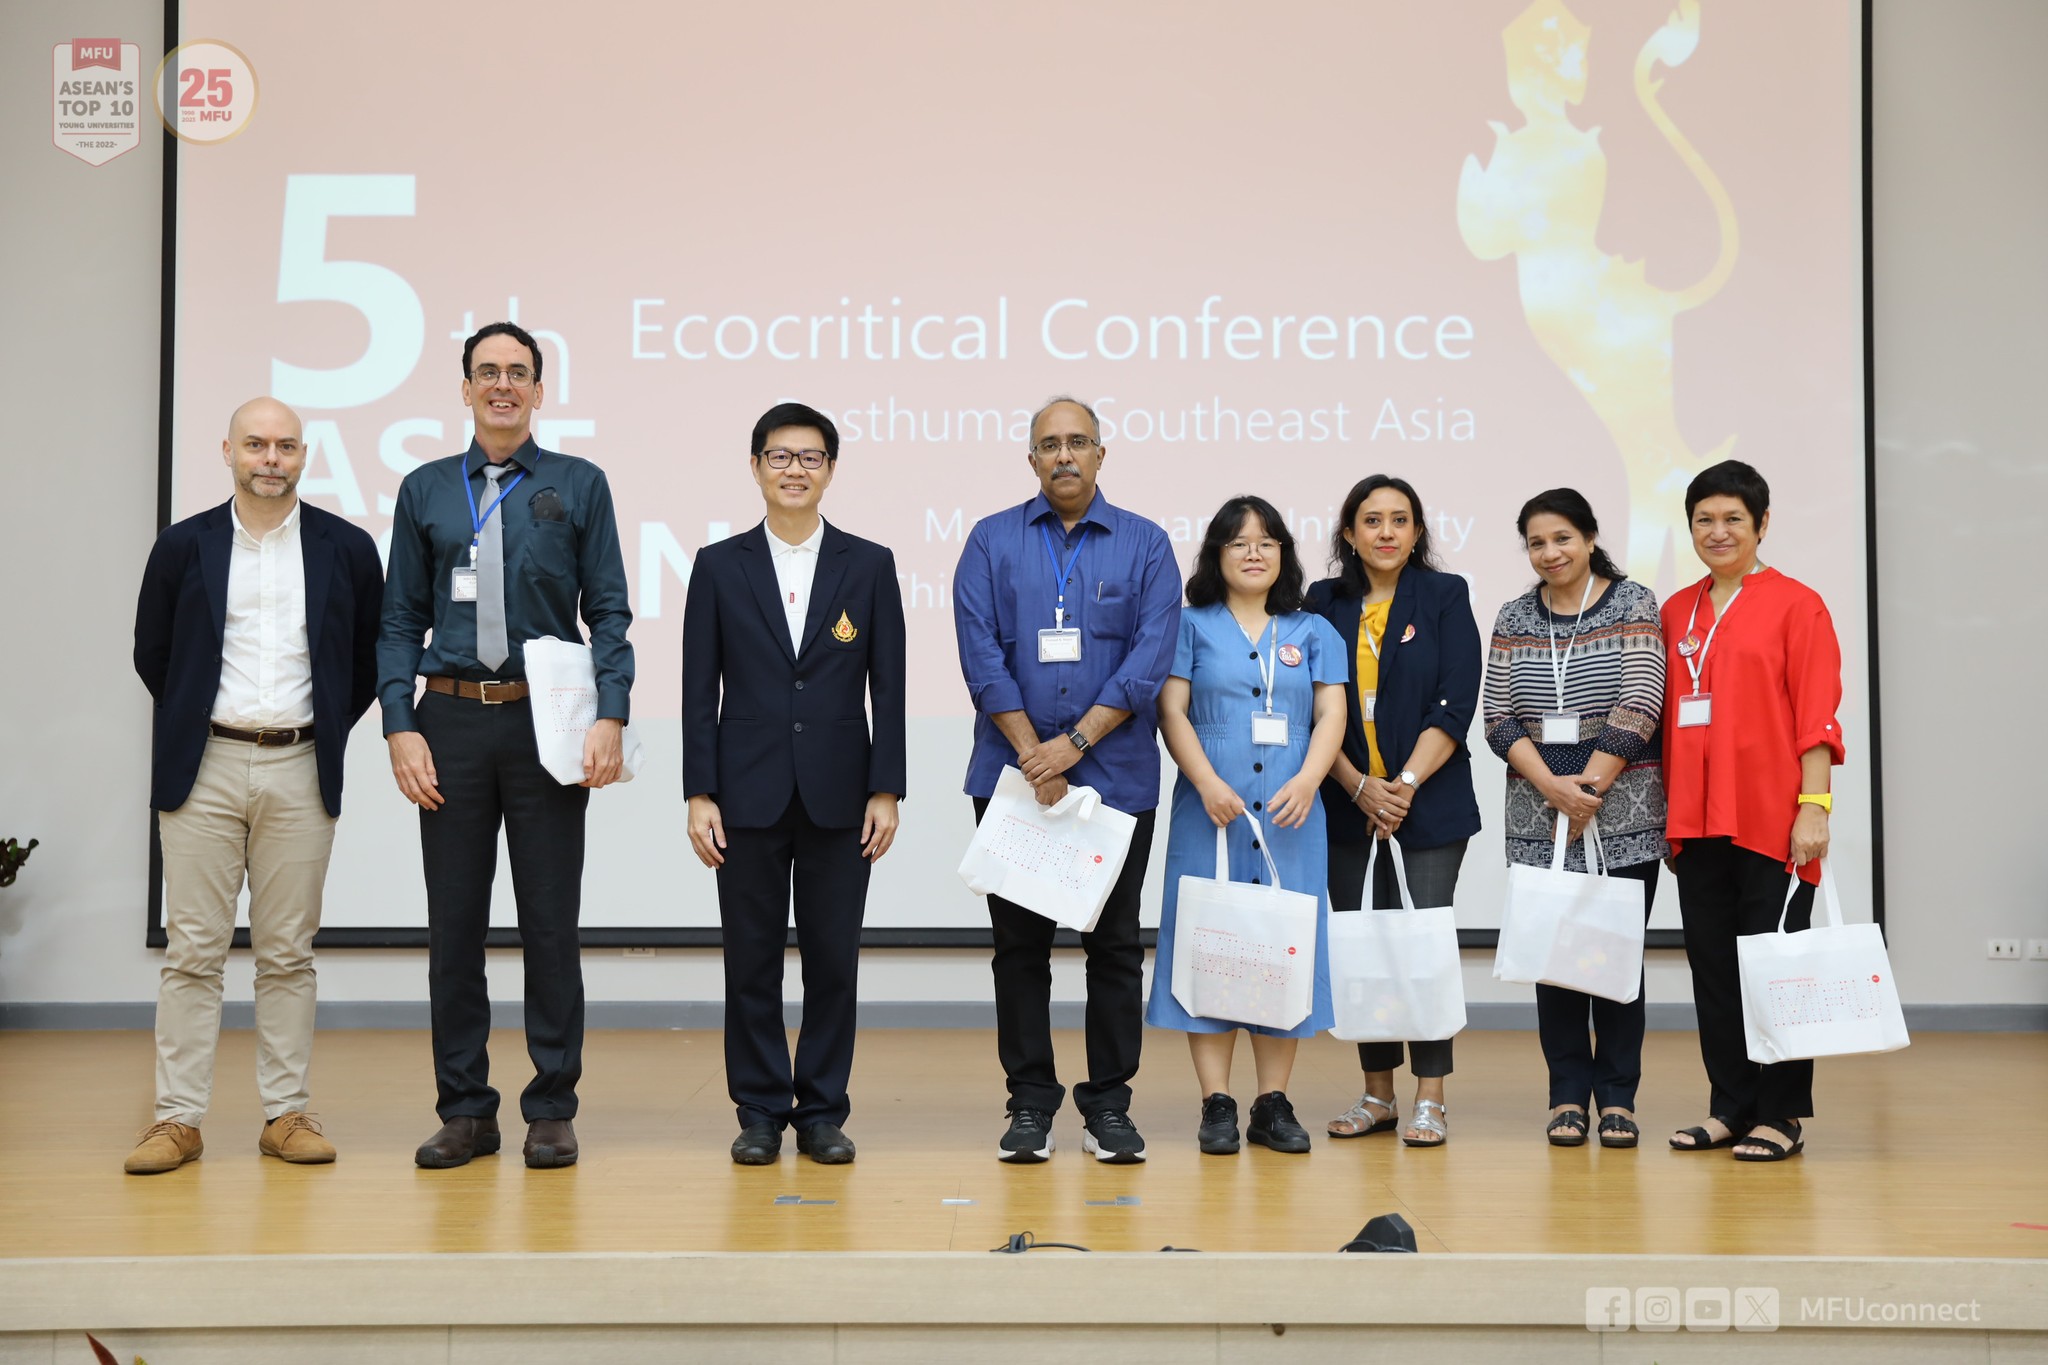 The 5th ASLE-ASEAN Ecocritical Conference on Posthuman Southeast Asia